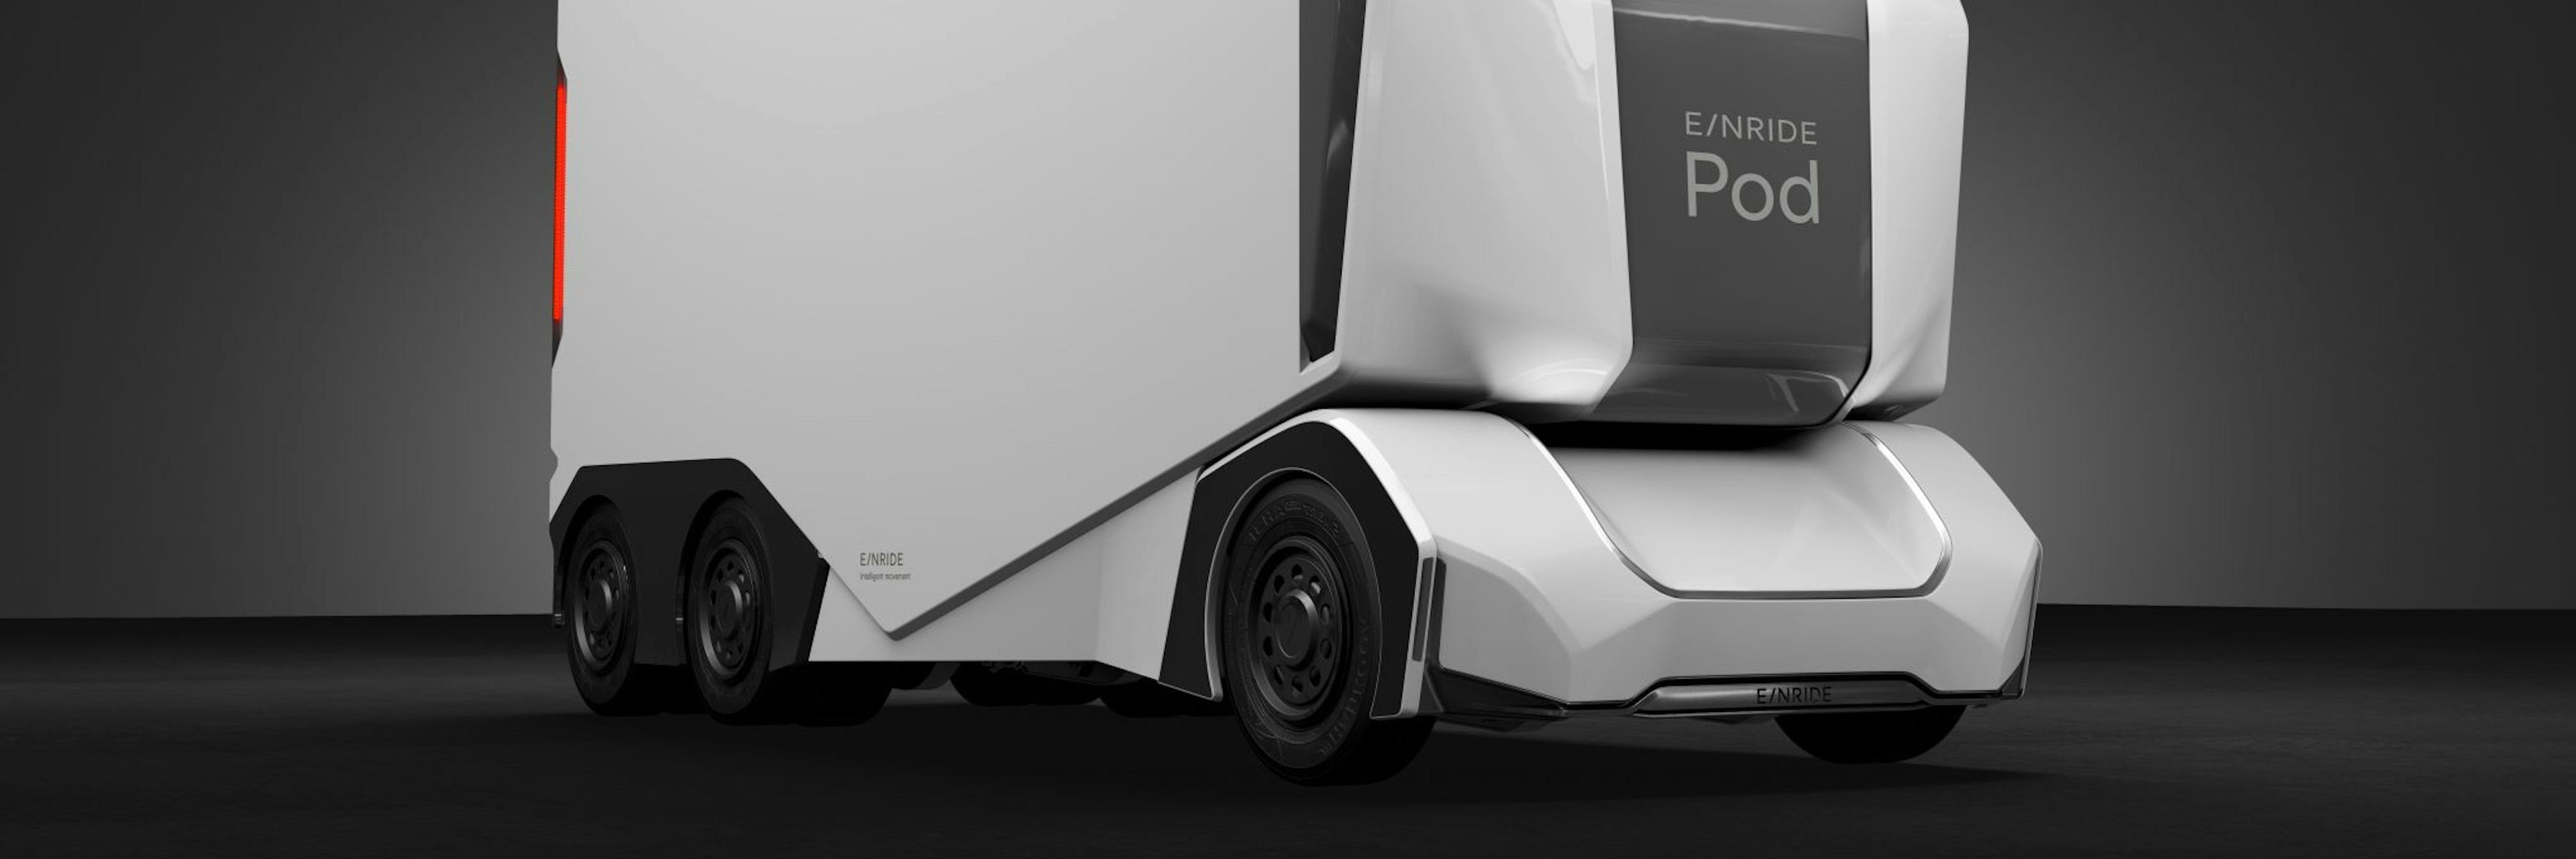 A concept image of an Einride truck